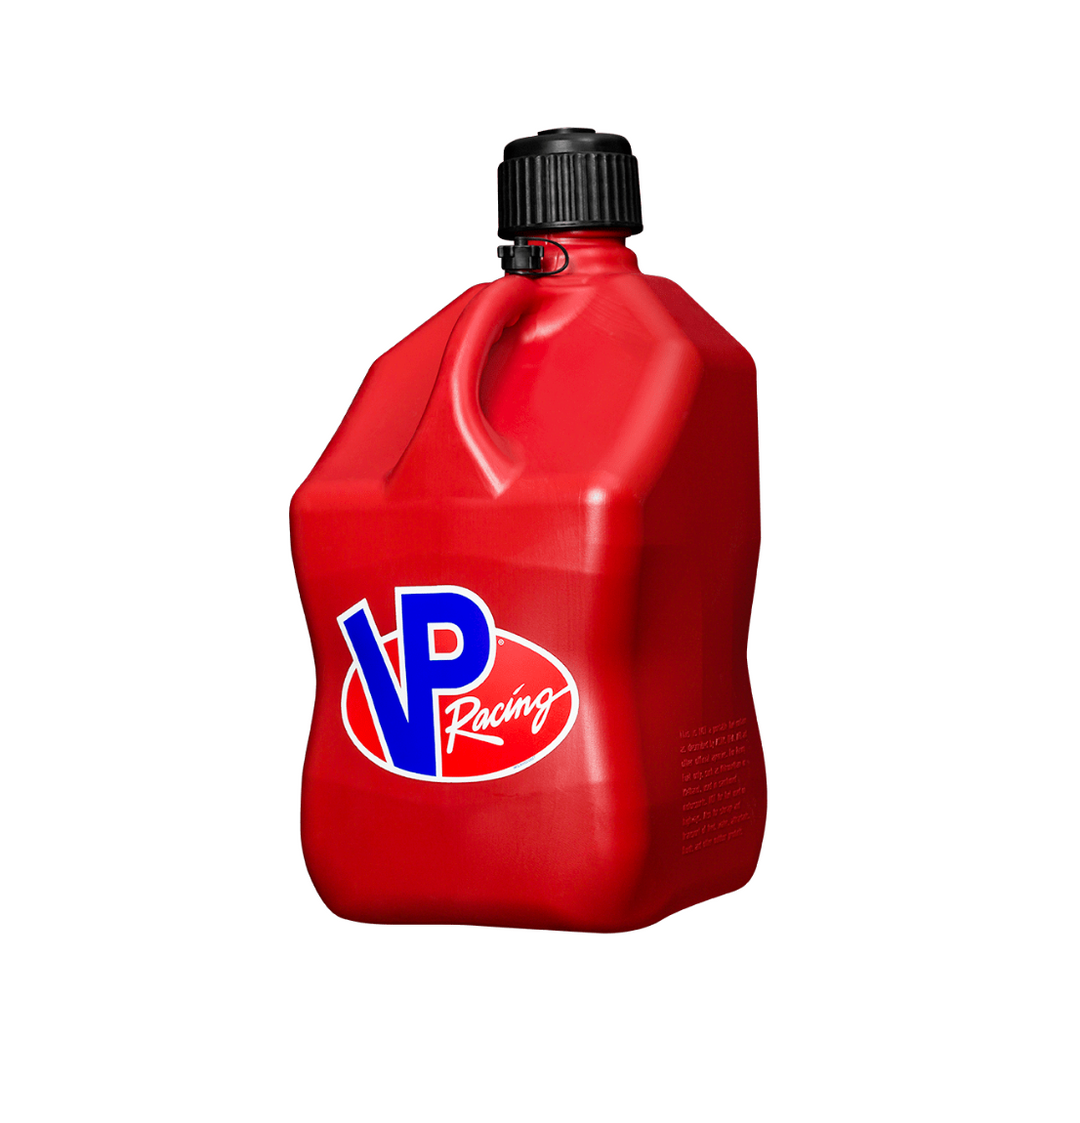 VP Racing 5.5-Gallon Motorsport Container - Red Jug, Black Cap - Dirty Racing Products